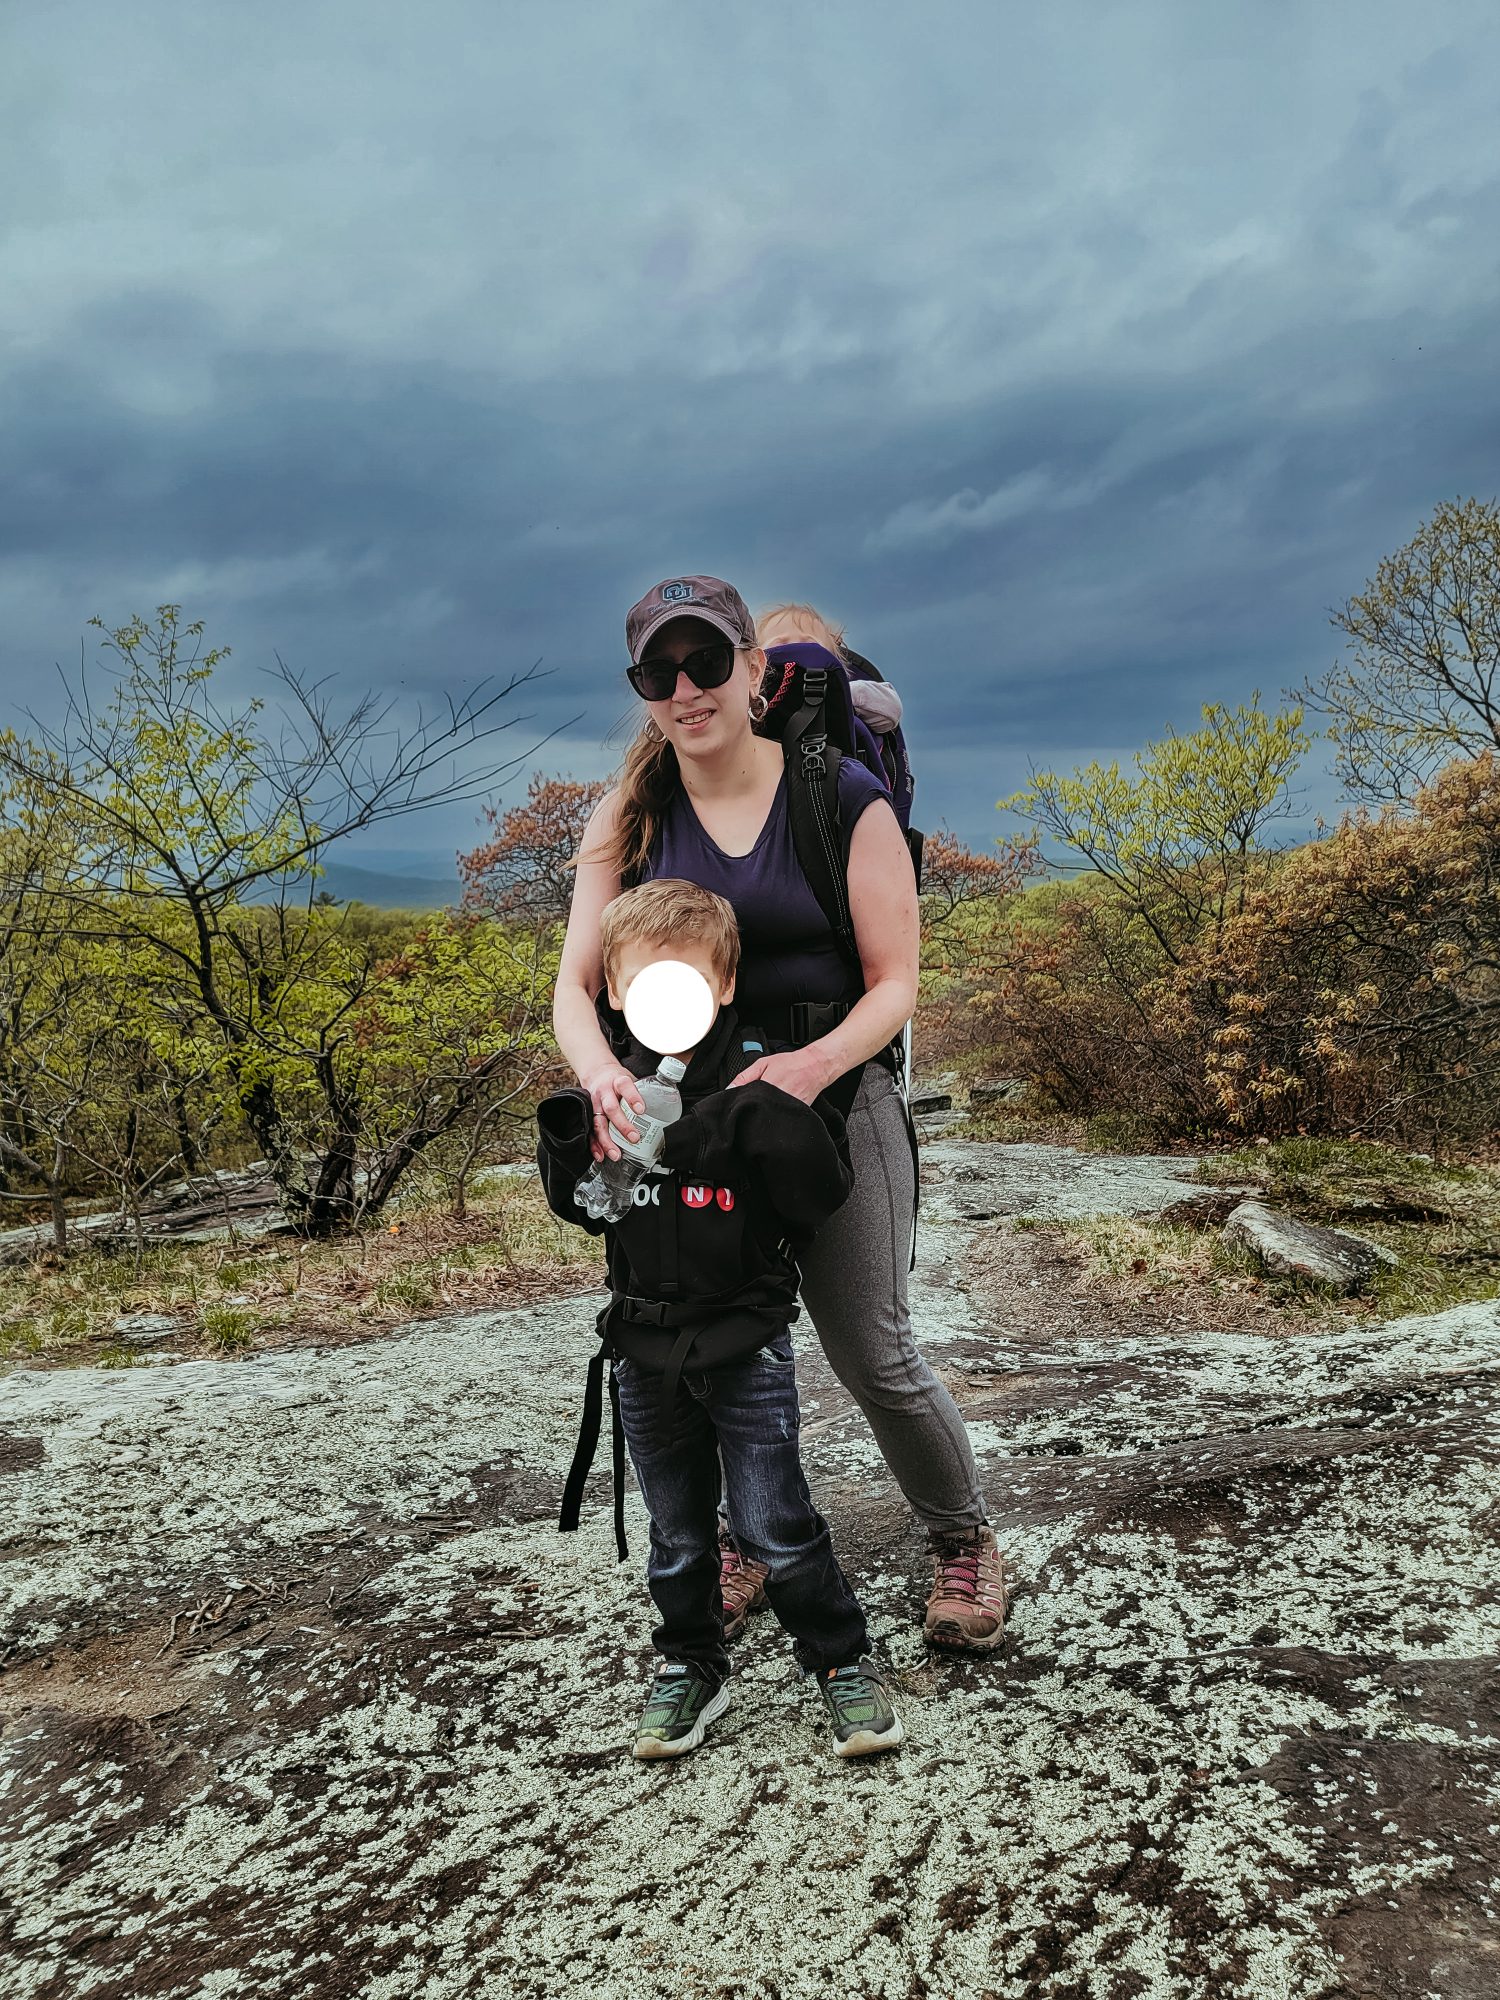 The author with her children - her baby in a carrier on her back and her preschooler walking solo (his first 2+ mile elevation hike).